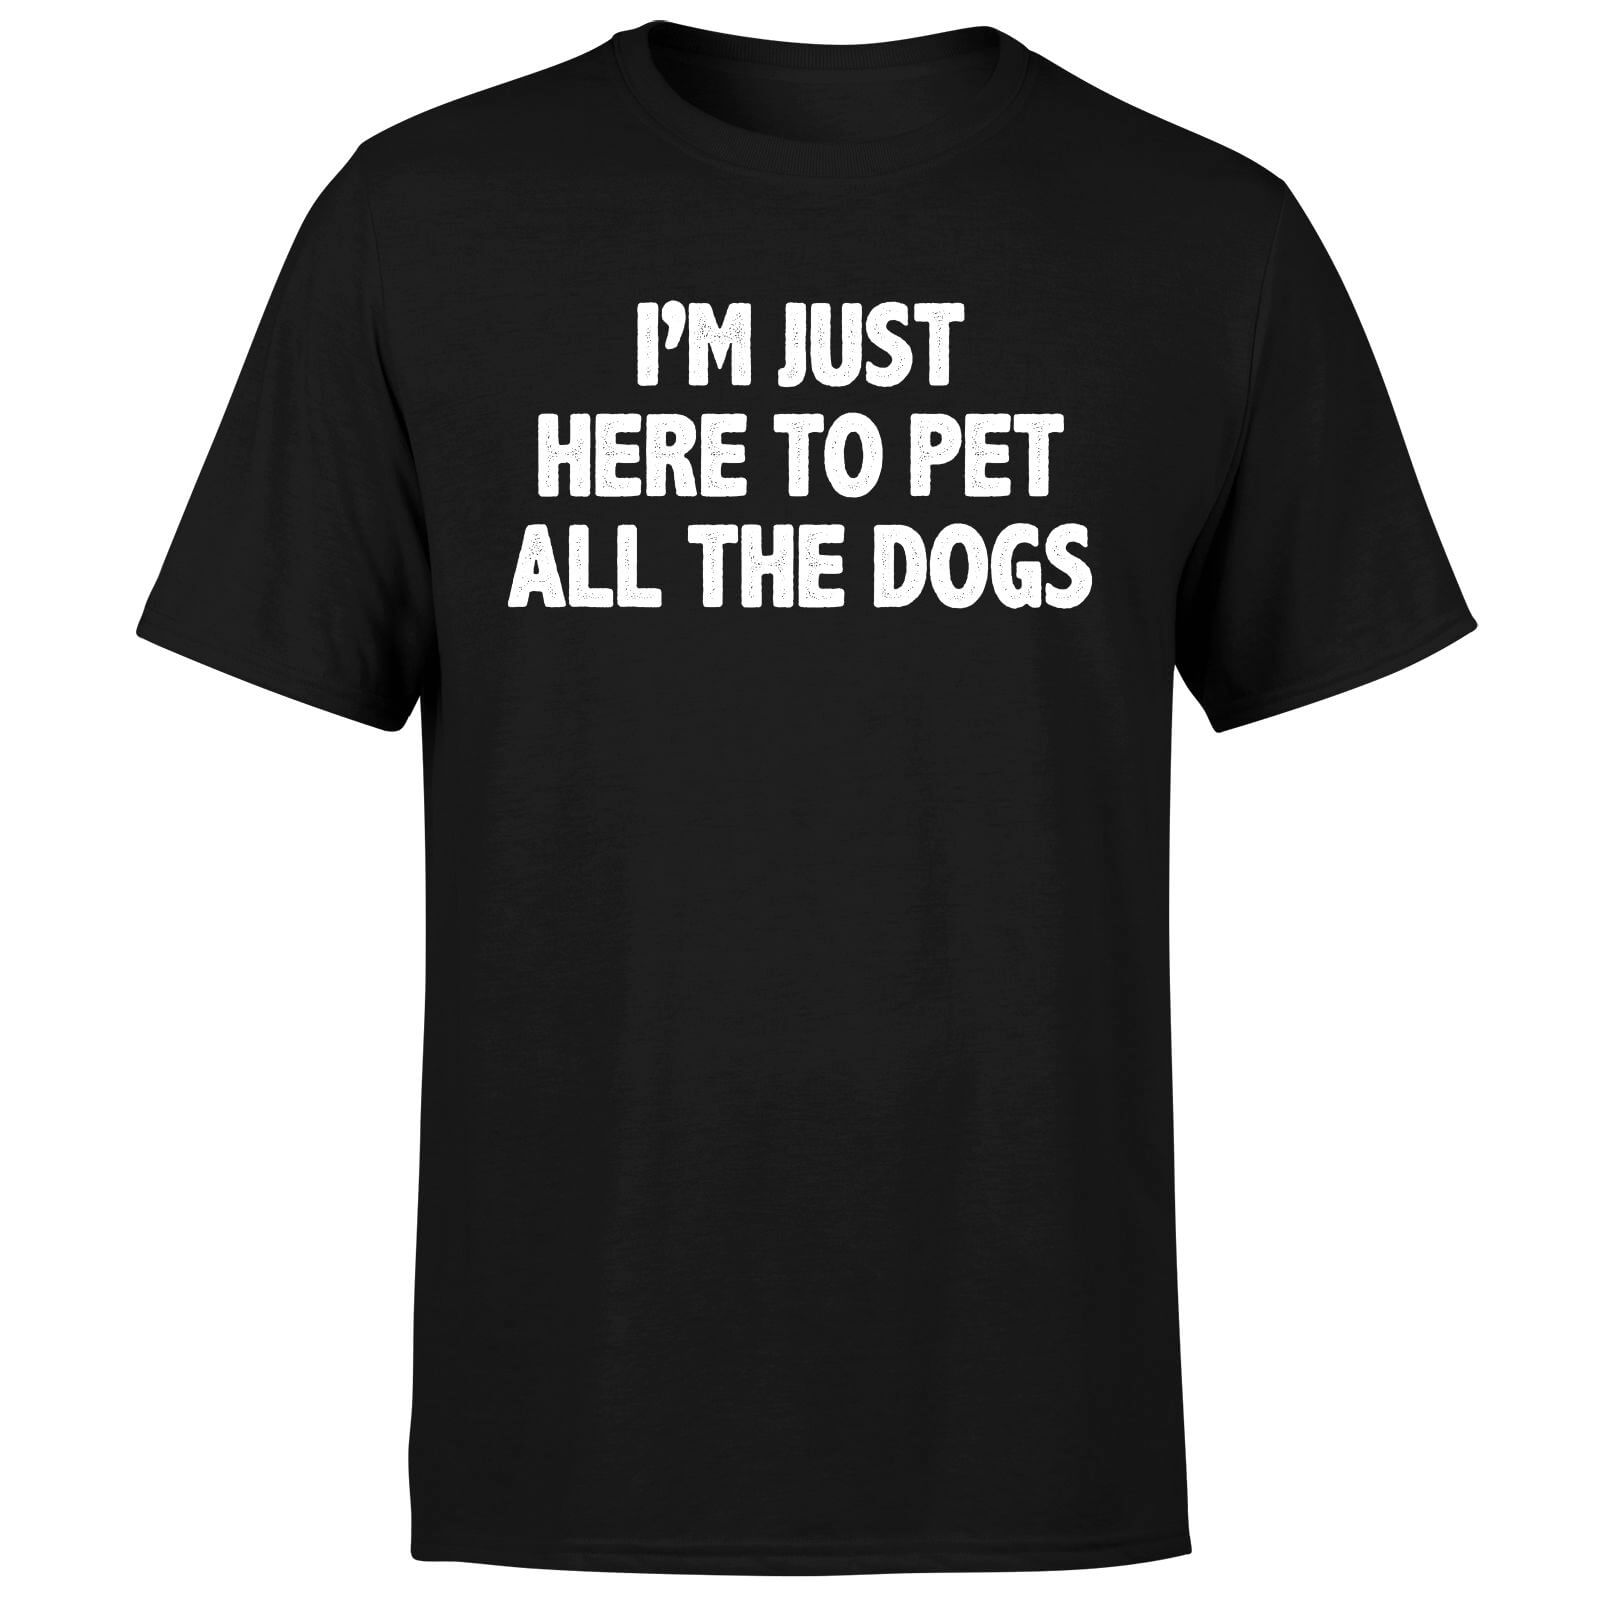 I'm Just Here To Pet The Dogs T-Shirt - Black - S - Black